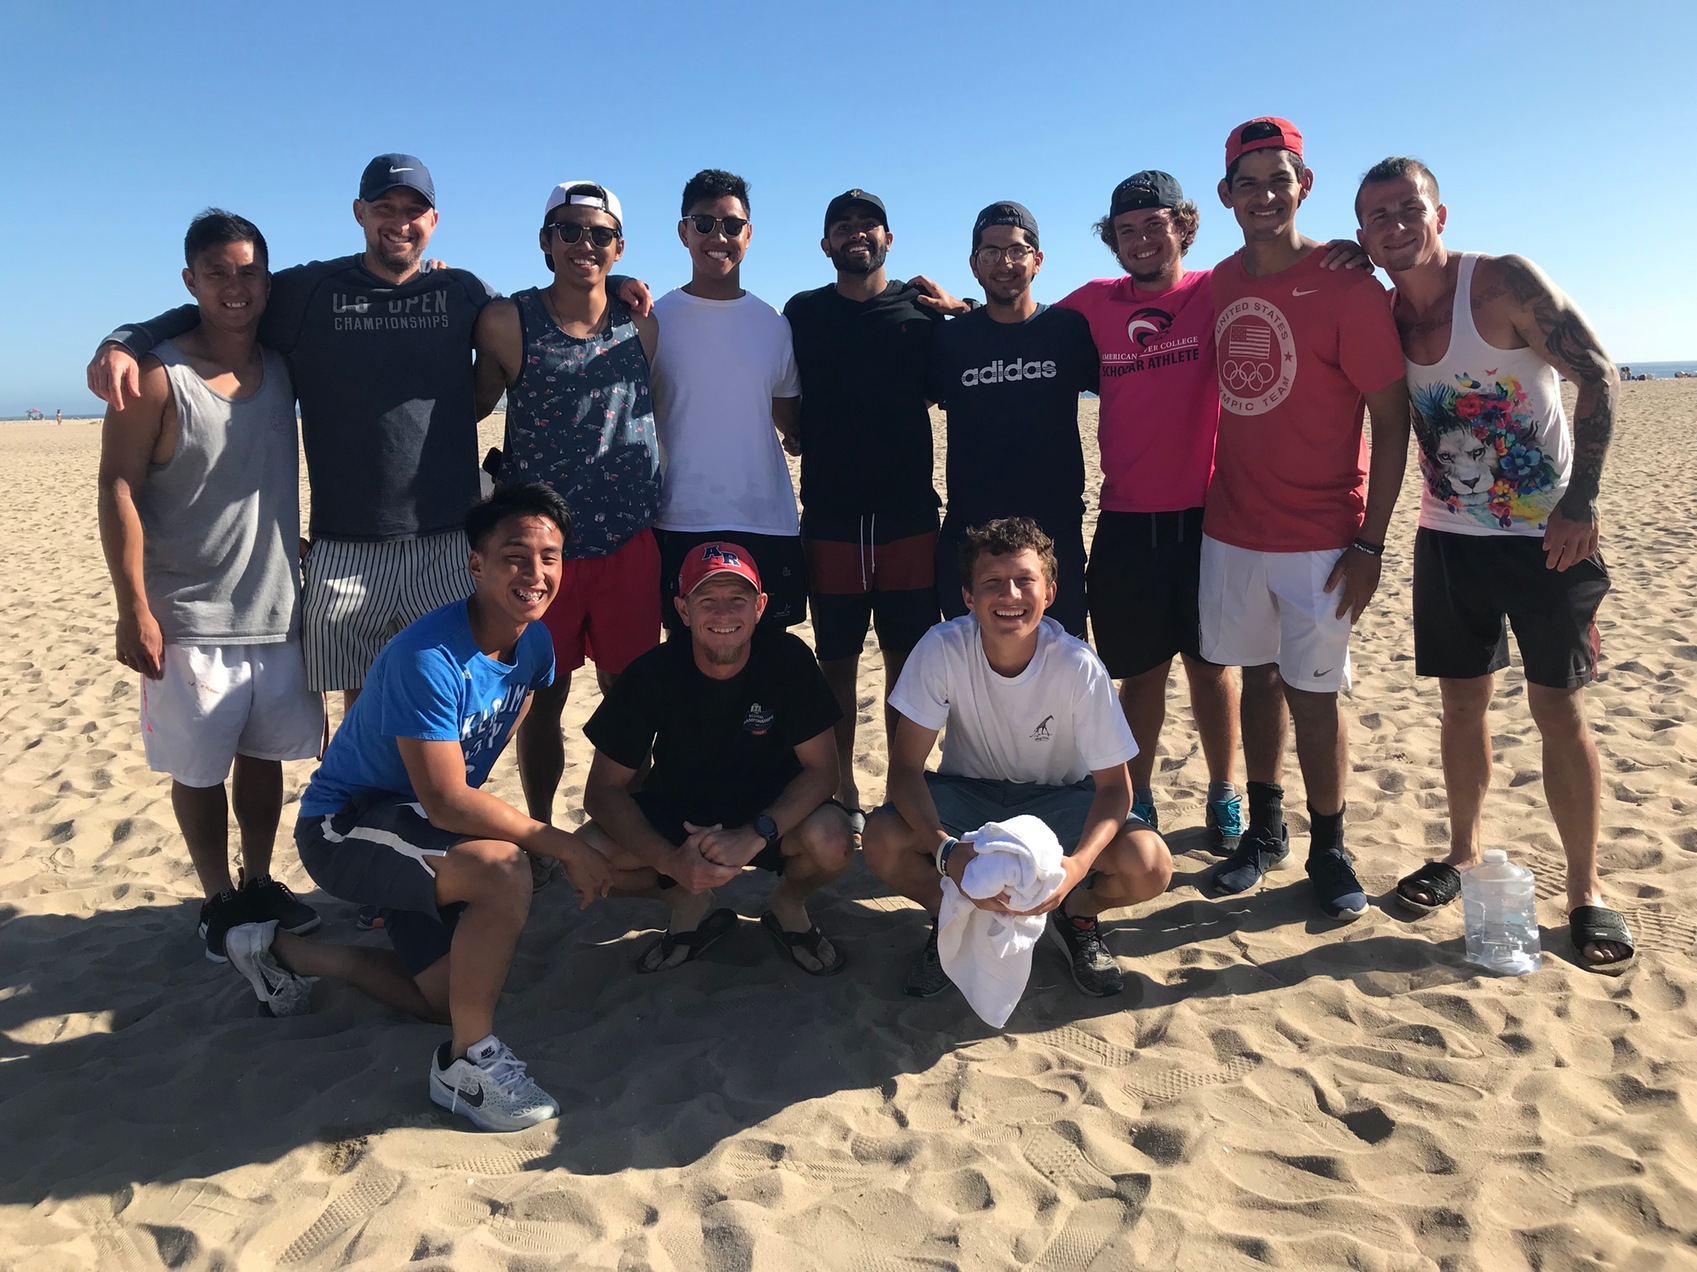 Team photo in SoCal